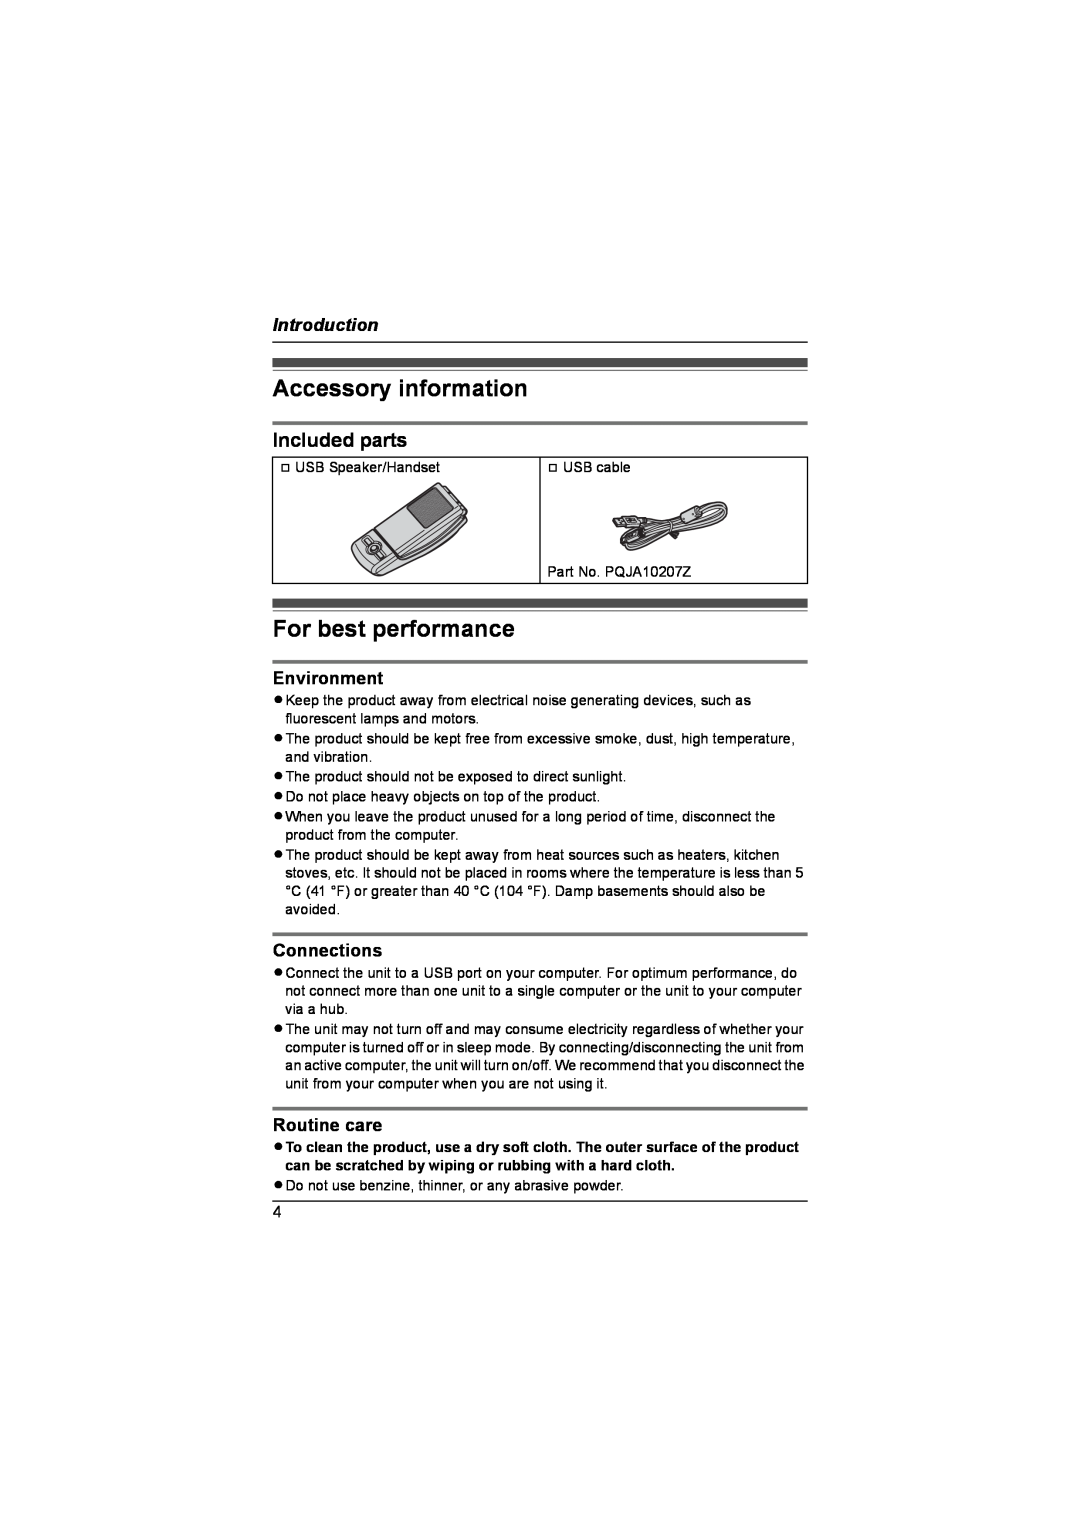 Panasonic KX-TS710 Accessory information, For best performance, Included parts, Introduction, Environment, Connections 